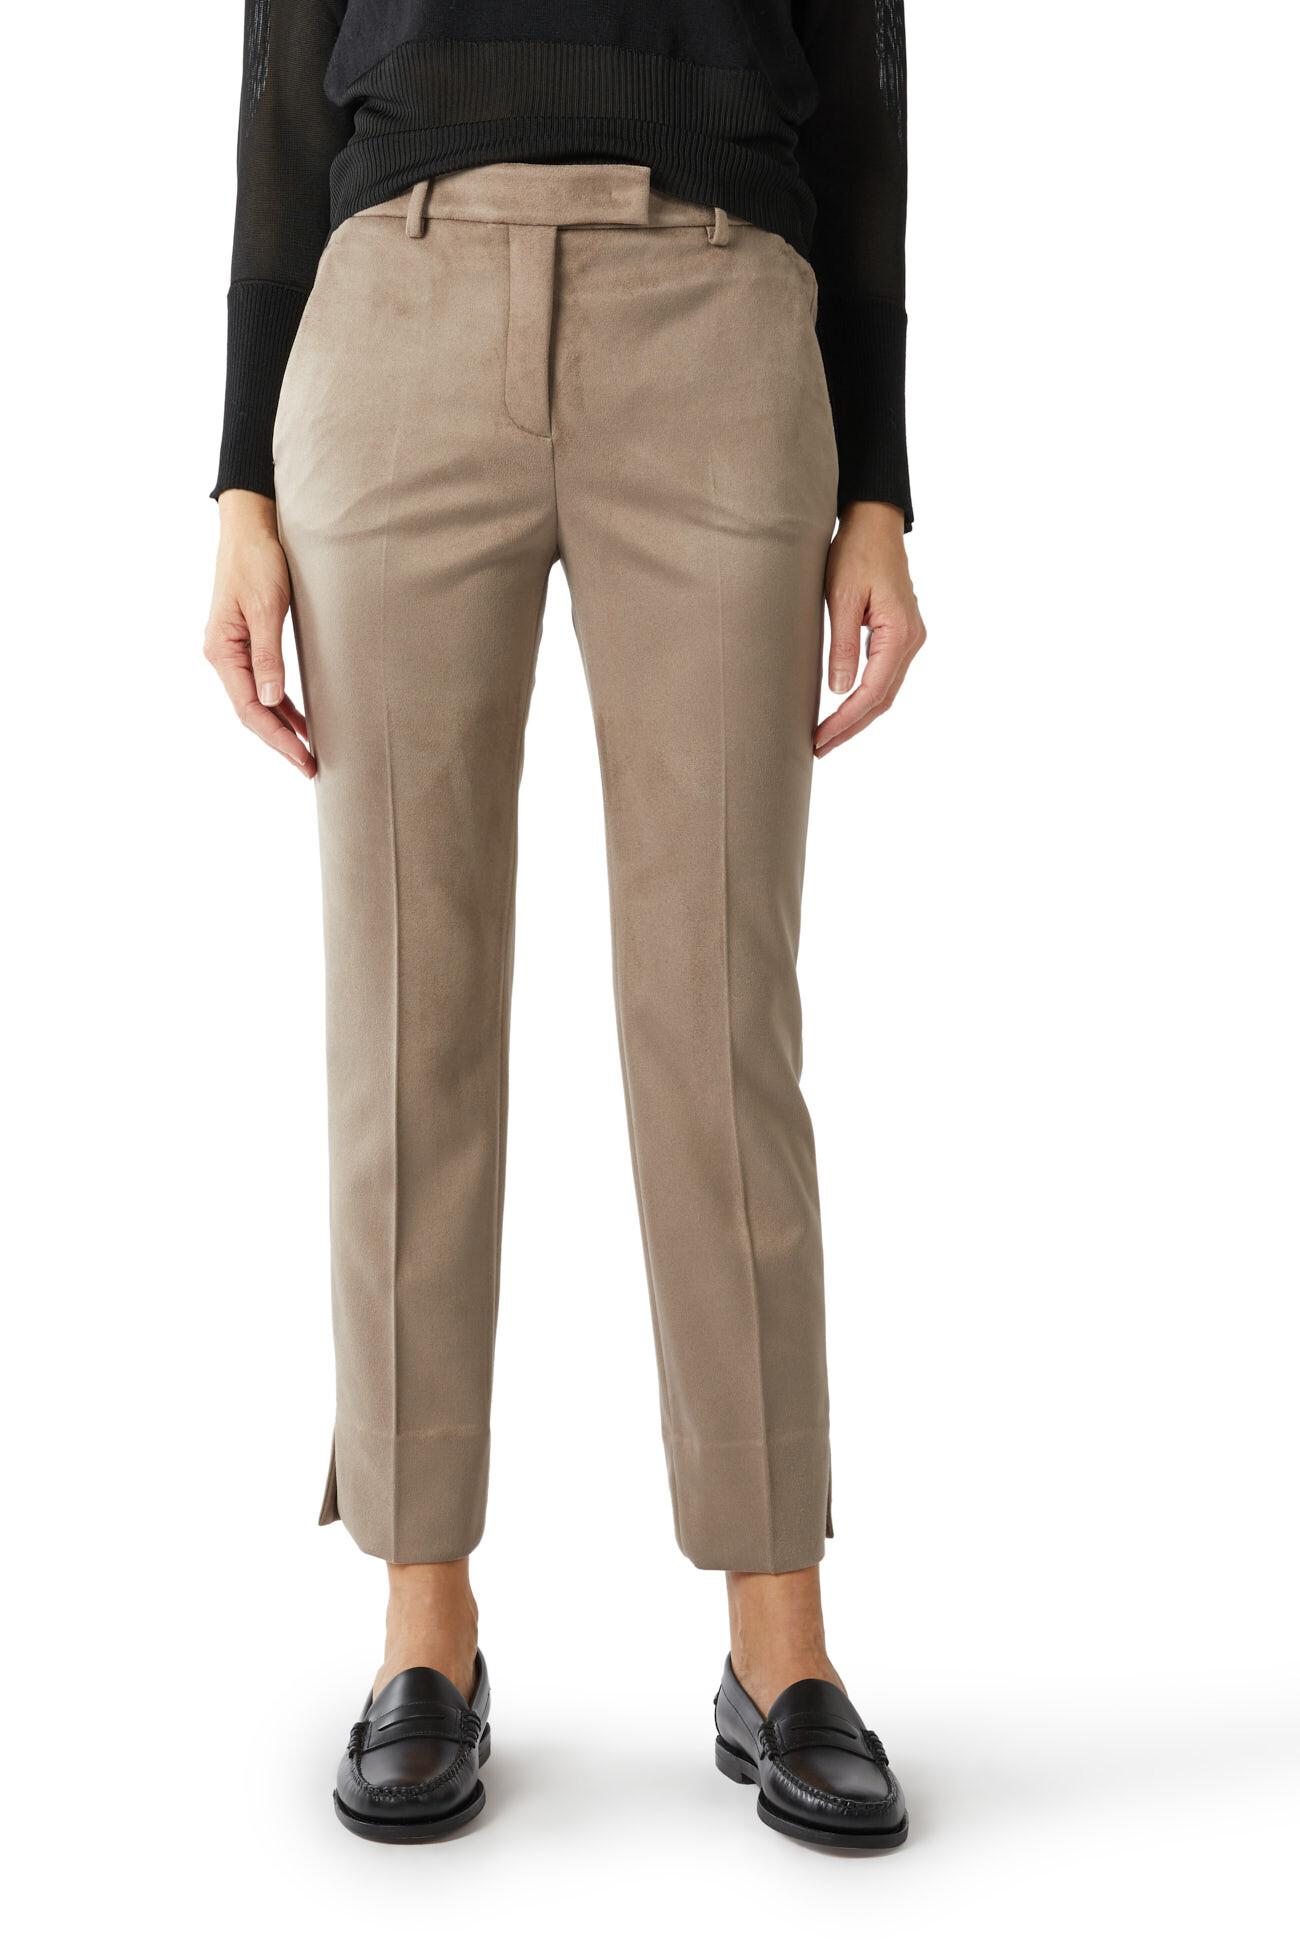 Incotex Women's Casual Pants 46 IT at FORZIERI